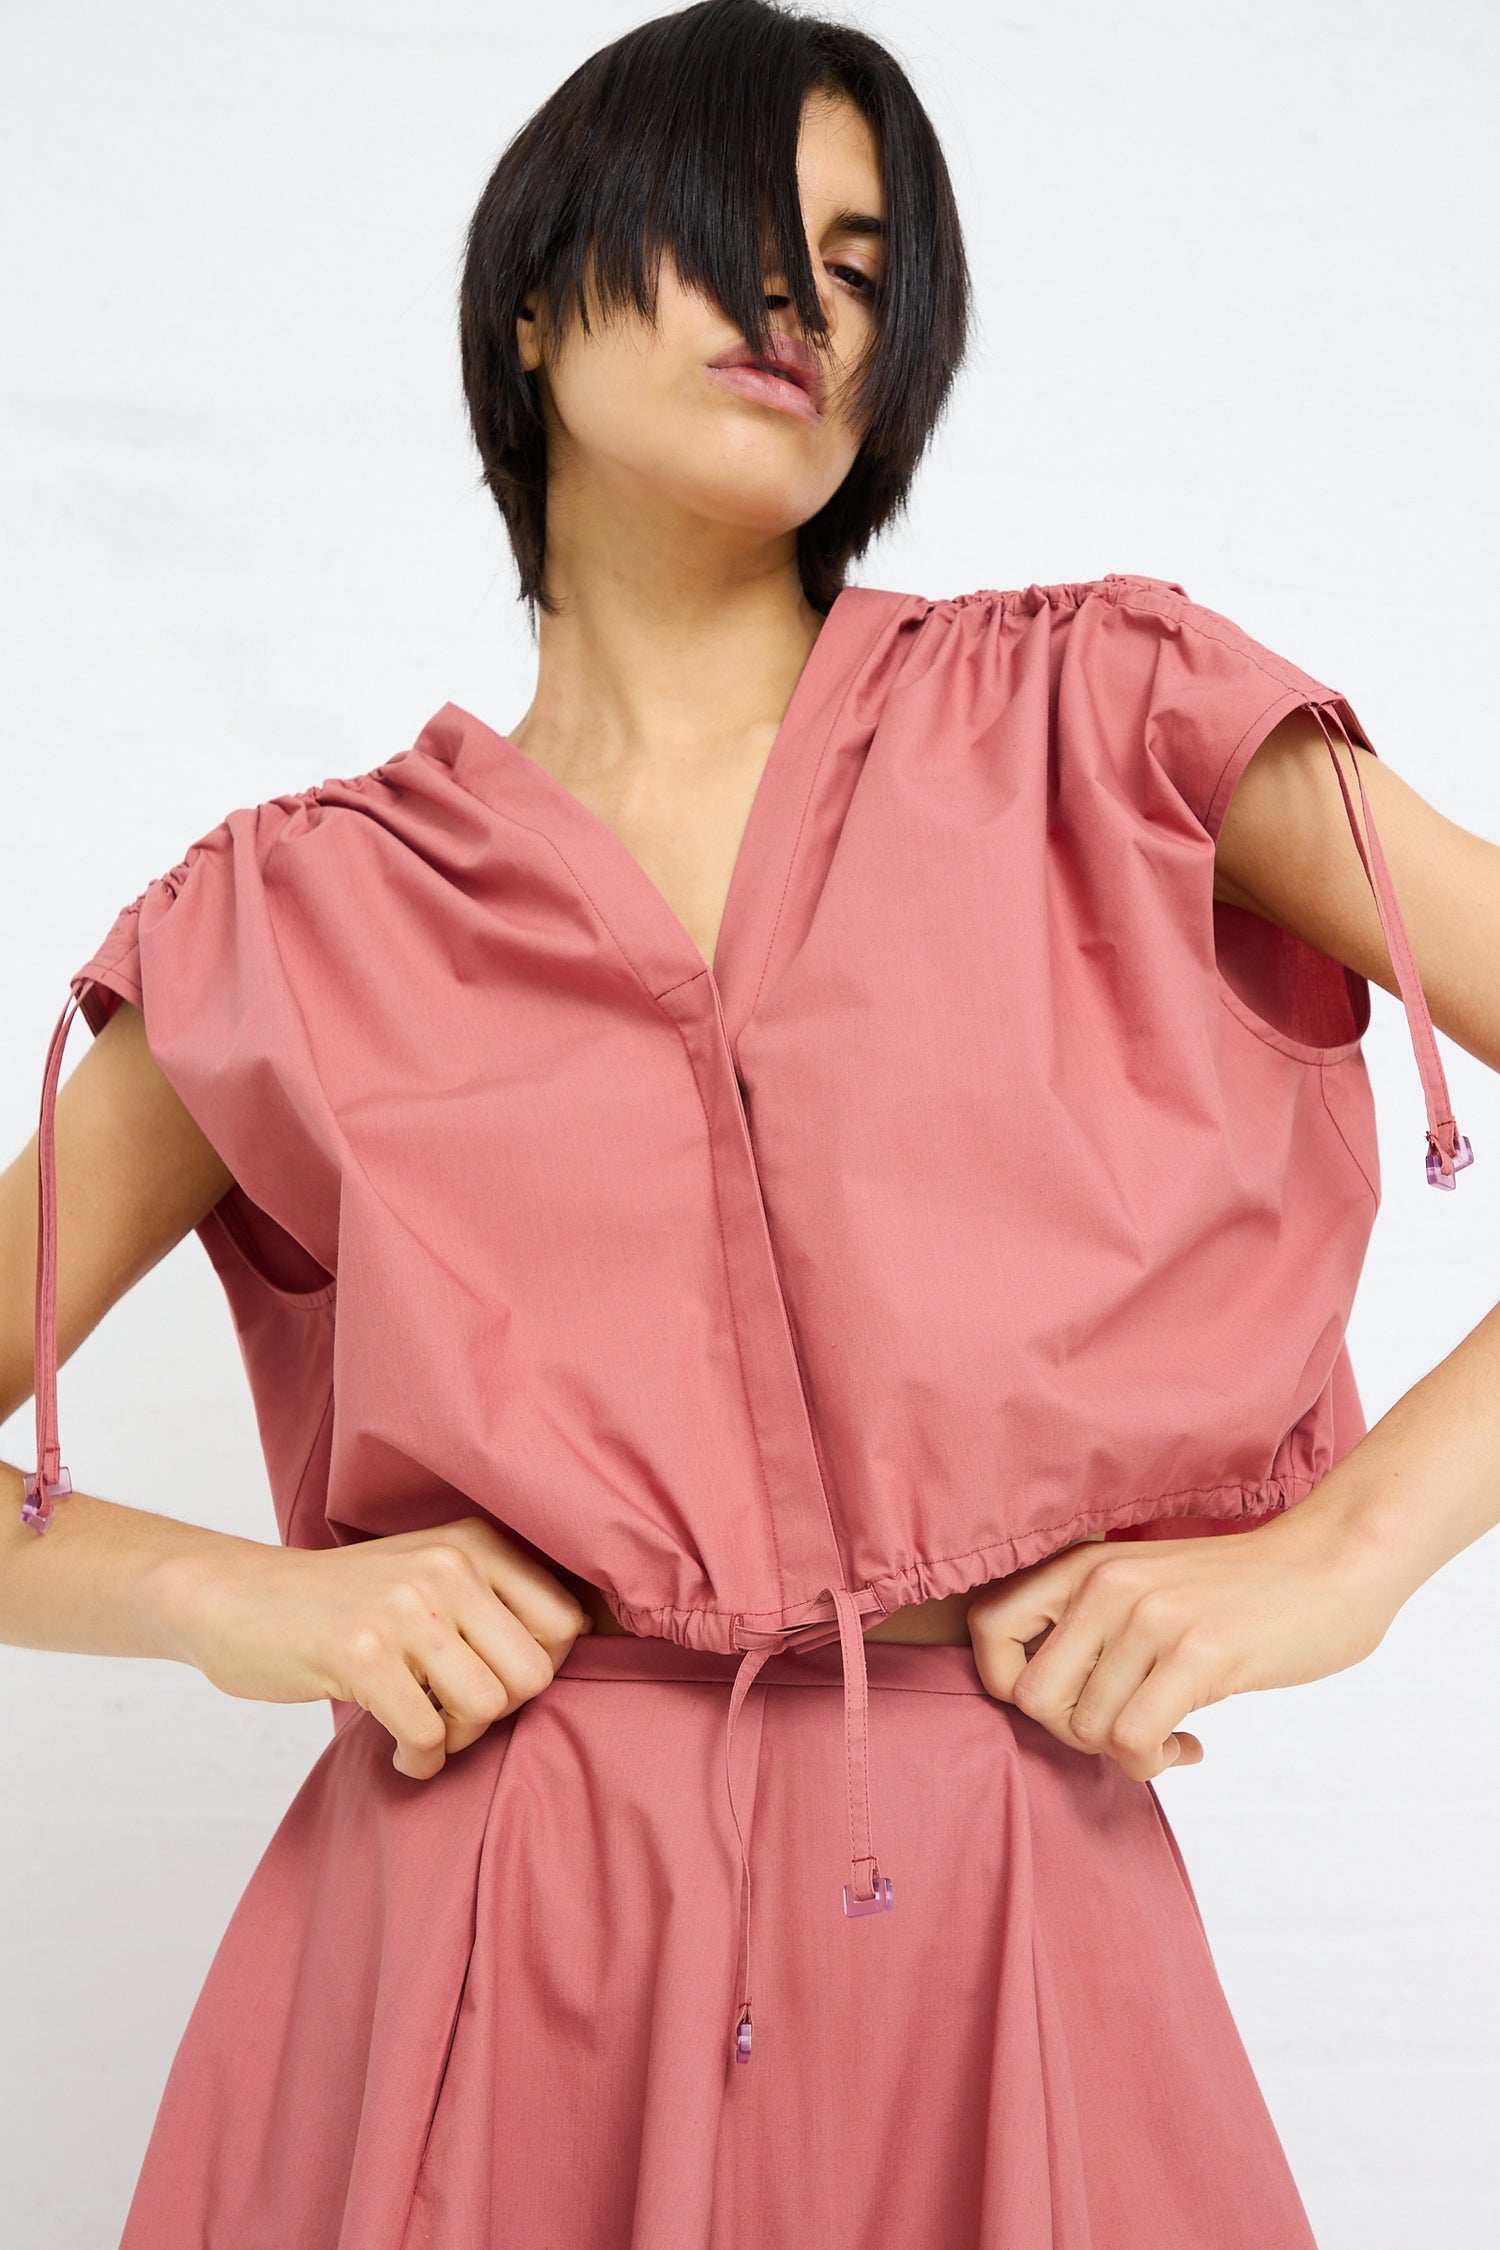 Woman in a pink Veronique Leroy Cotton Poplin Gathered Top in Canyon with adjustable ruche details, posing with hands on hips.